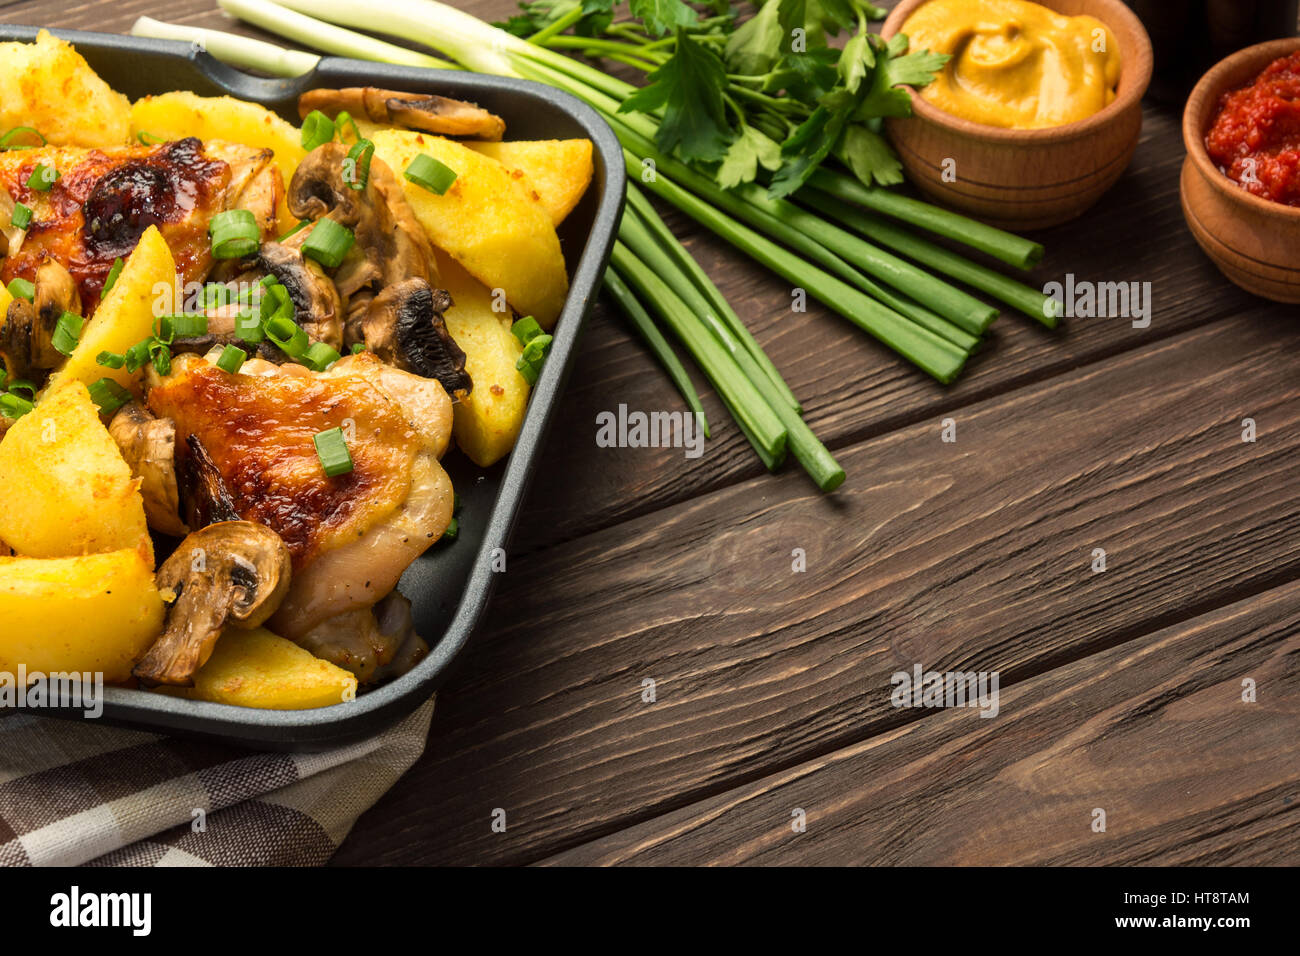 Dinner with baked chicken legs with olives spiced with aromatic herbs and potatoes with mushrooms on a rustic background.  Copy space. Stock Photo